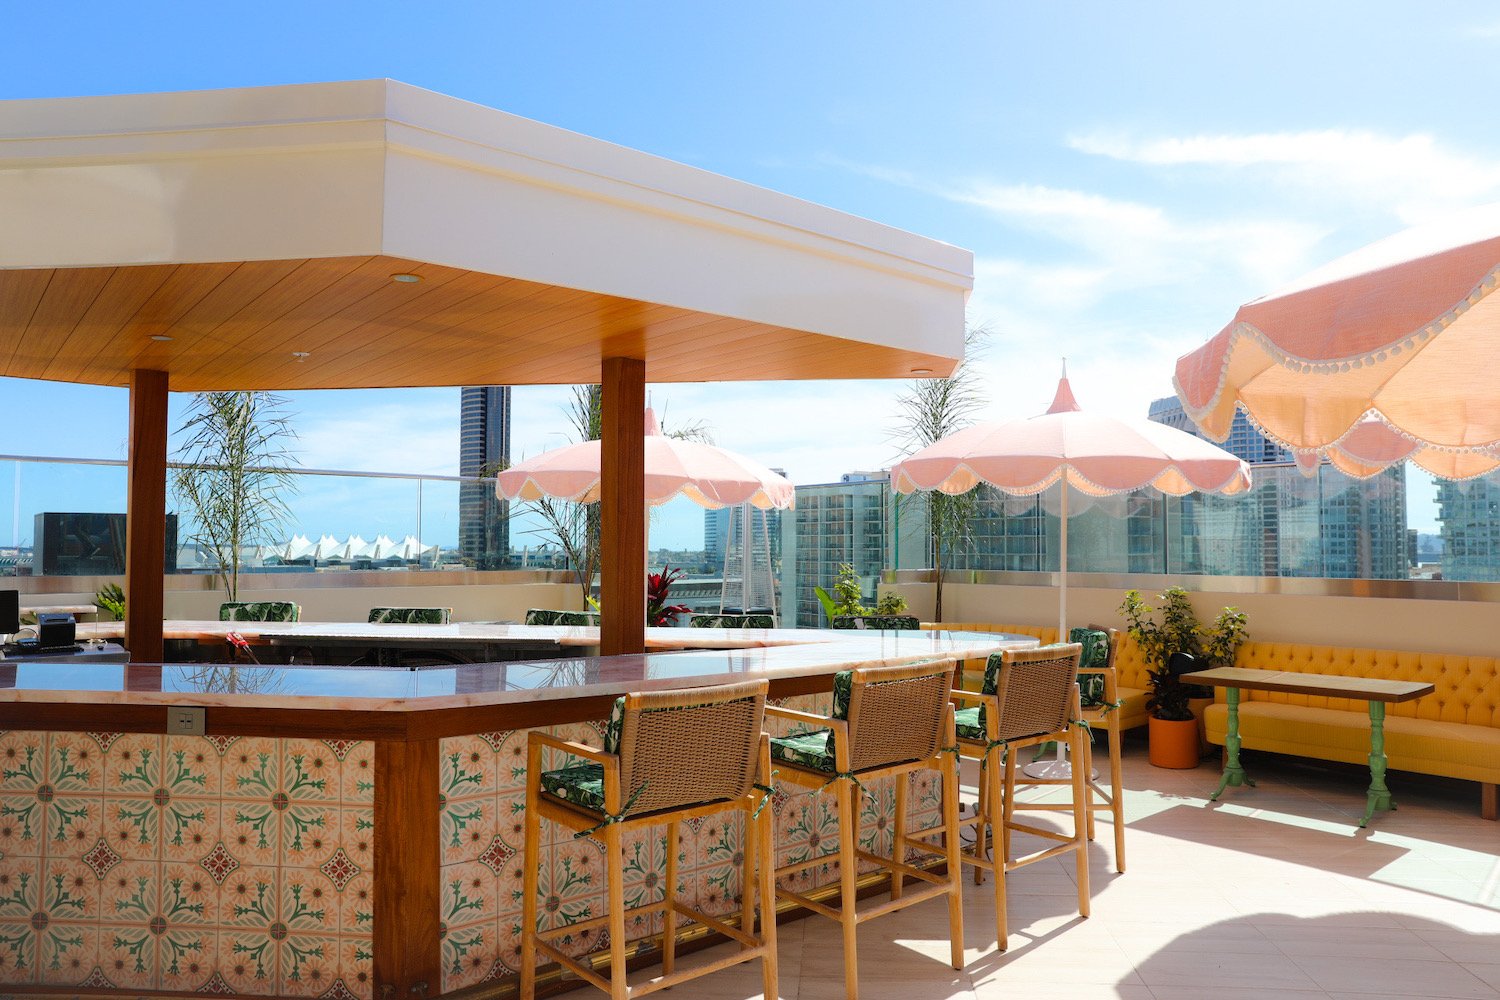 San Diego's AC Hotel Downtown's rooftop bar called Techo Beso in the Gaslamp Quarter